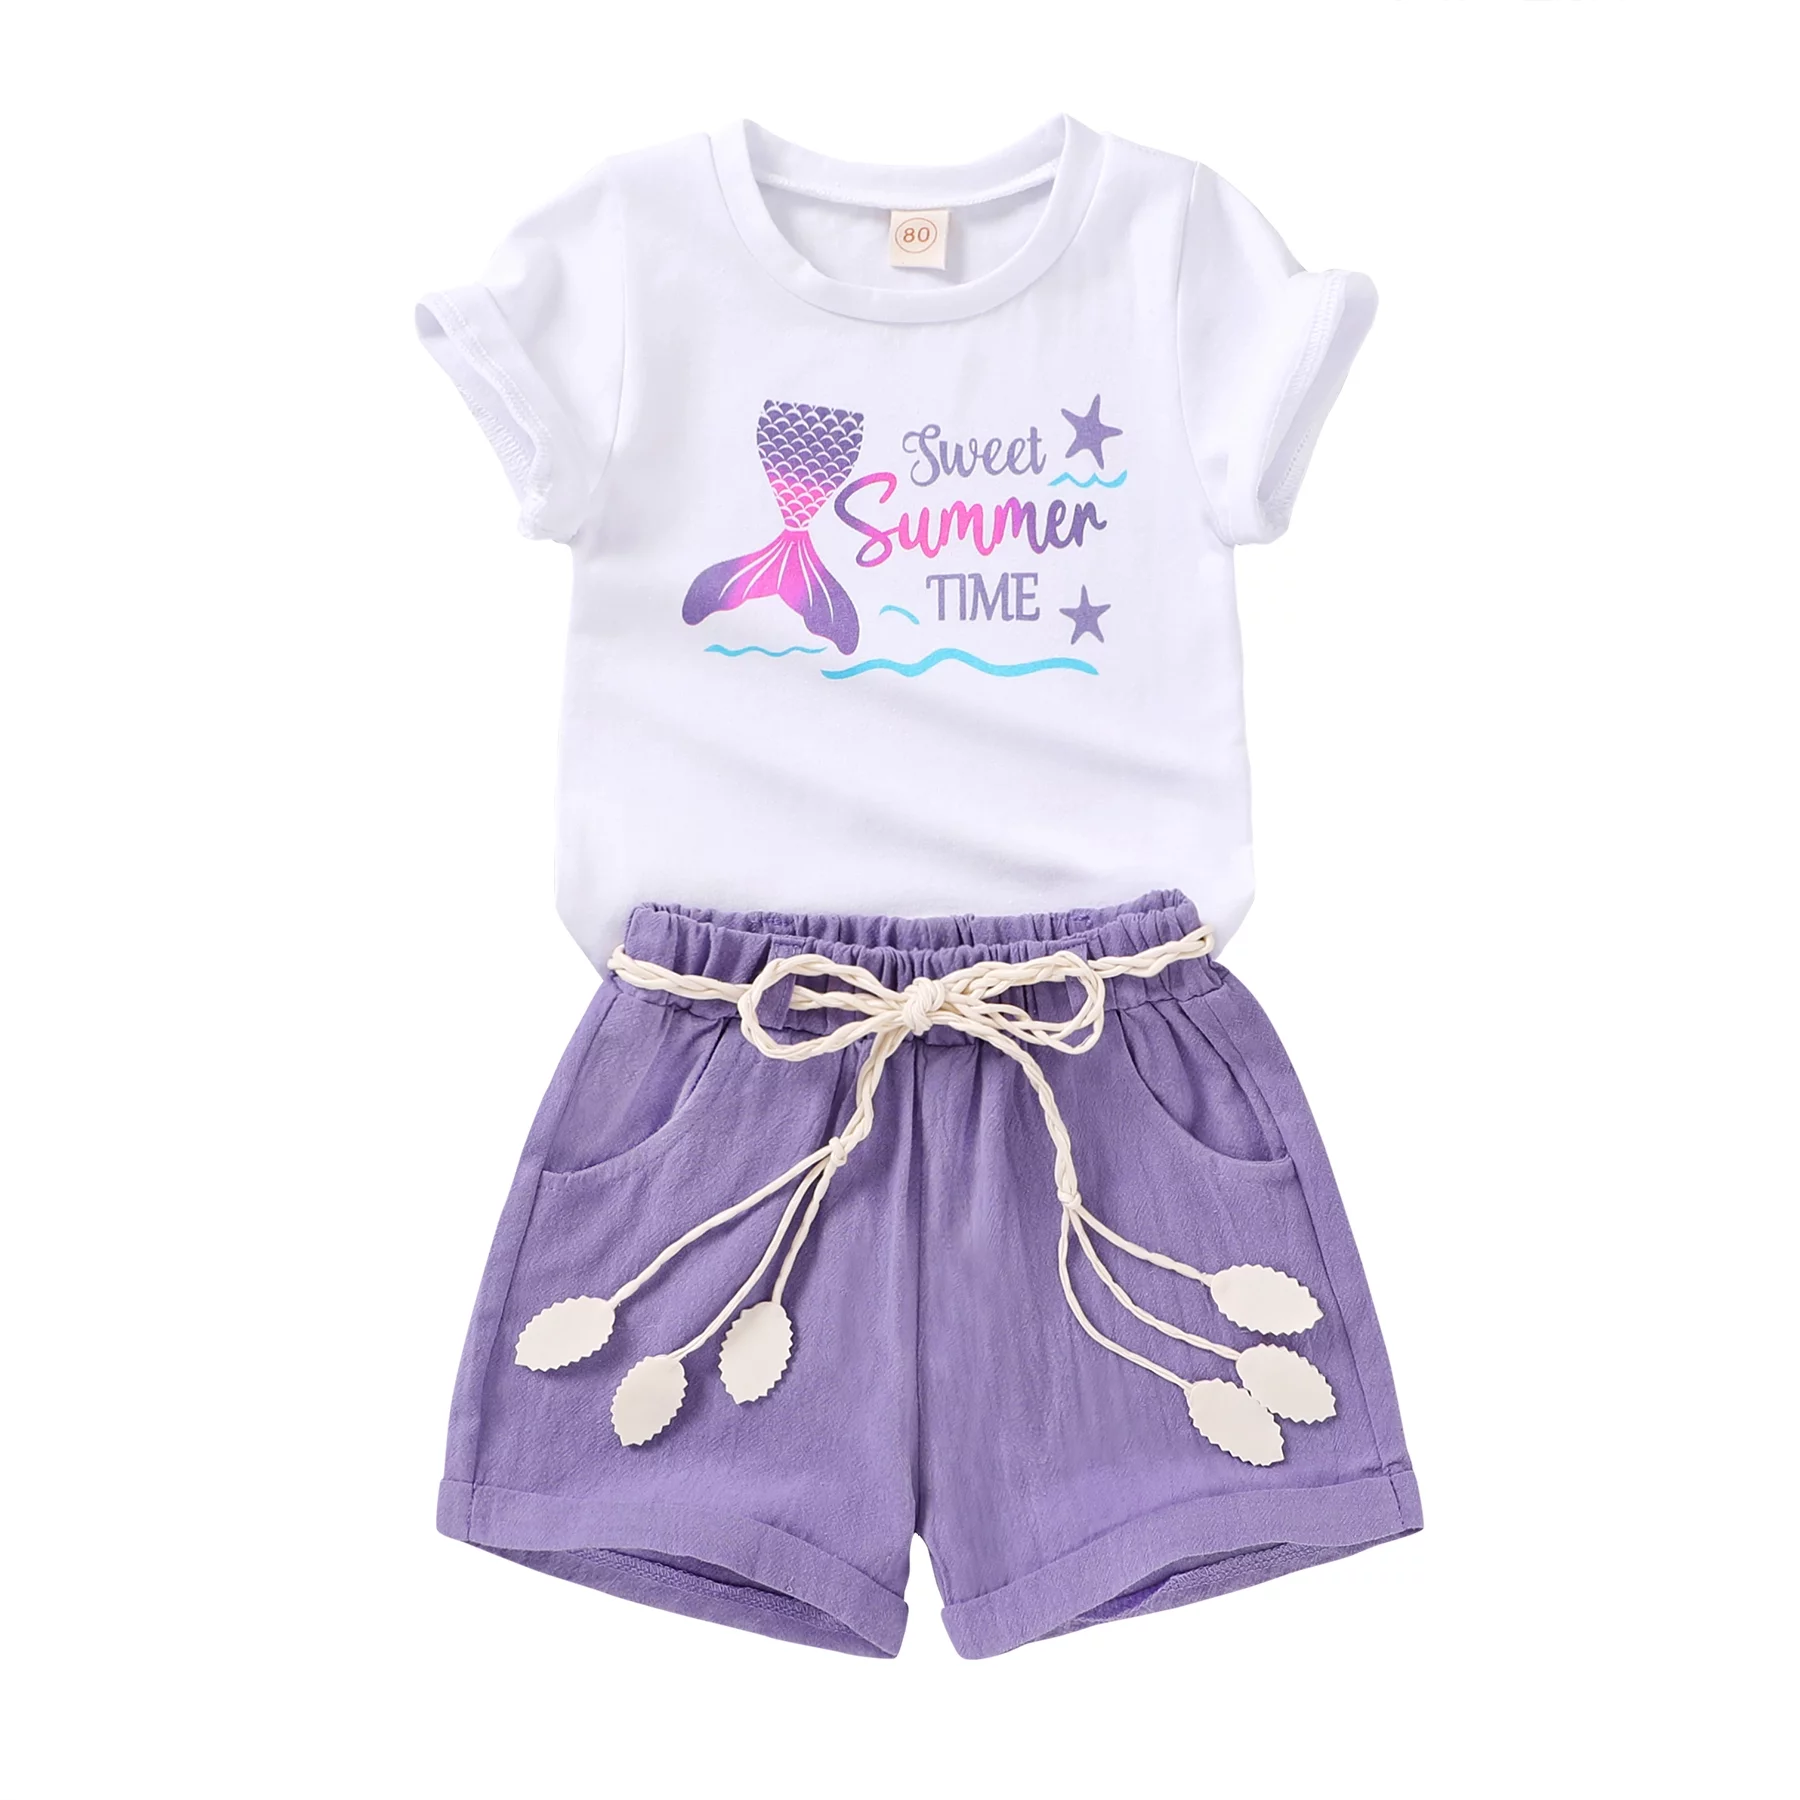 Younger Tree Toddler Baby Girl Summer Clothes Set Short Sleeve T-Shirt Shorts 2pcs Outfits for 2 Years